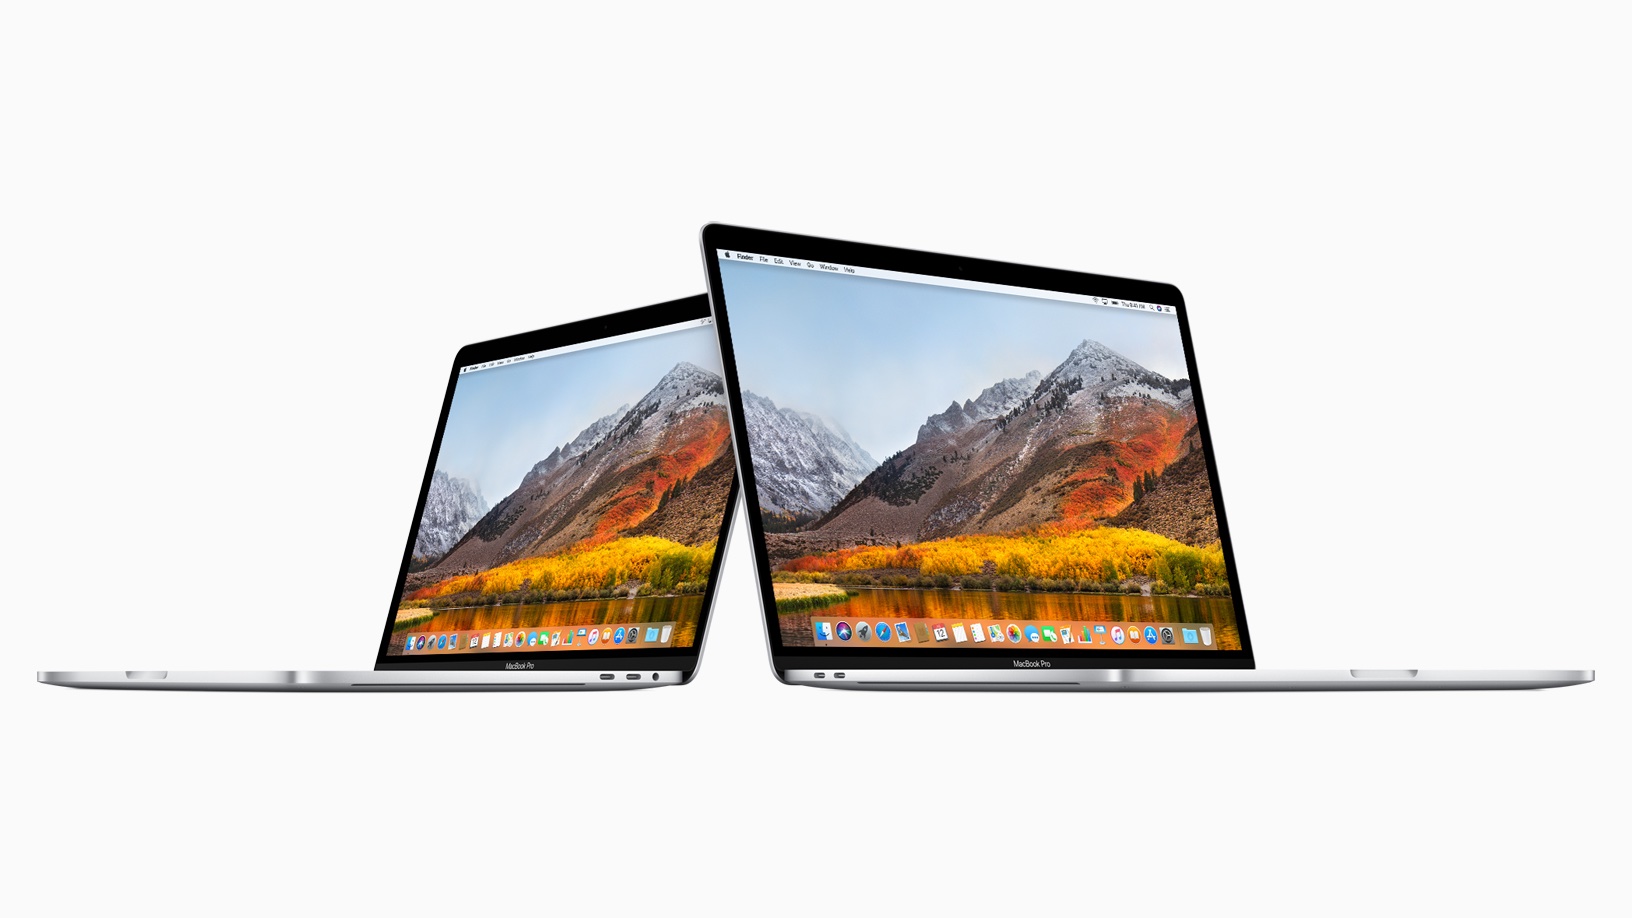 Apple updates the MacBook Pro with faster performance